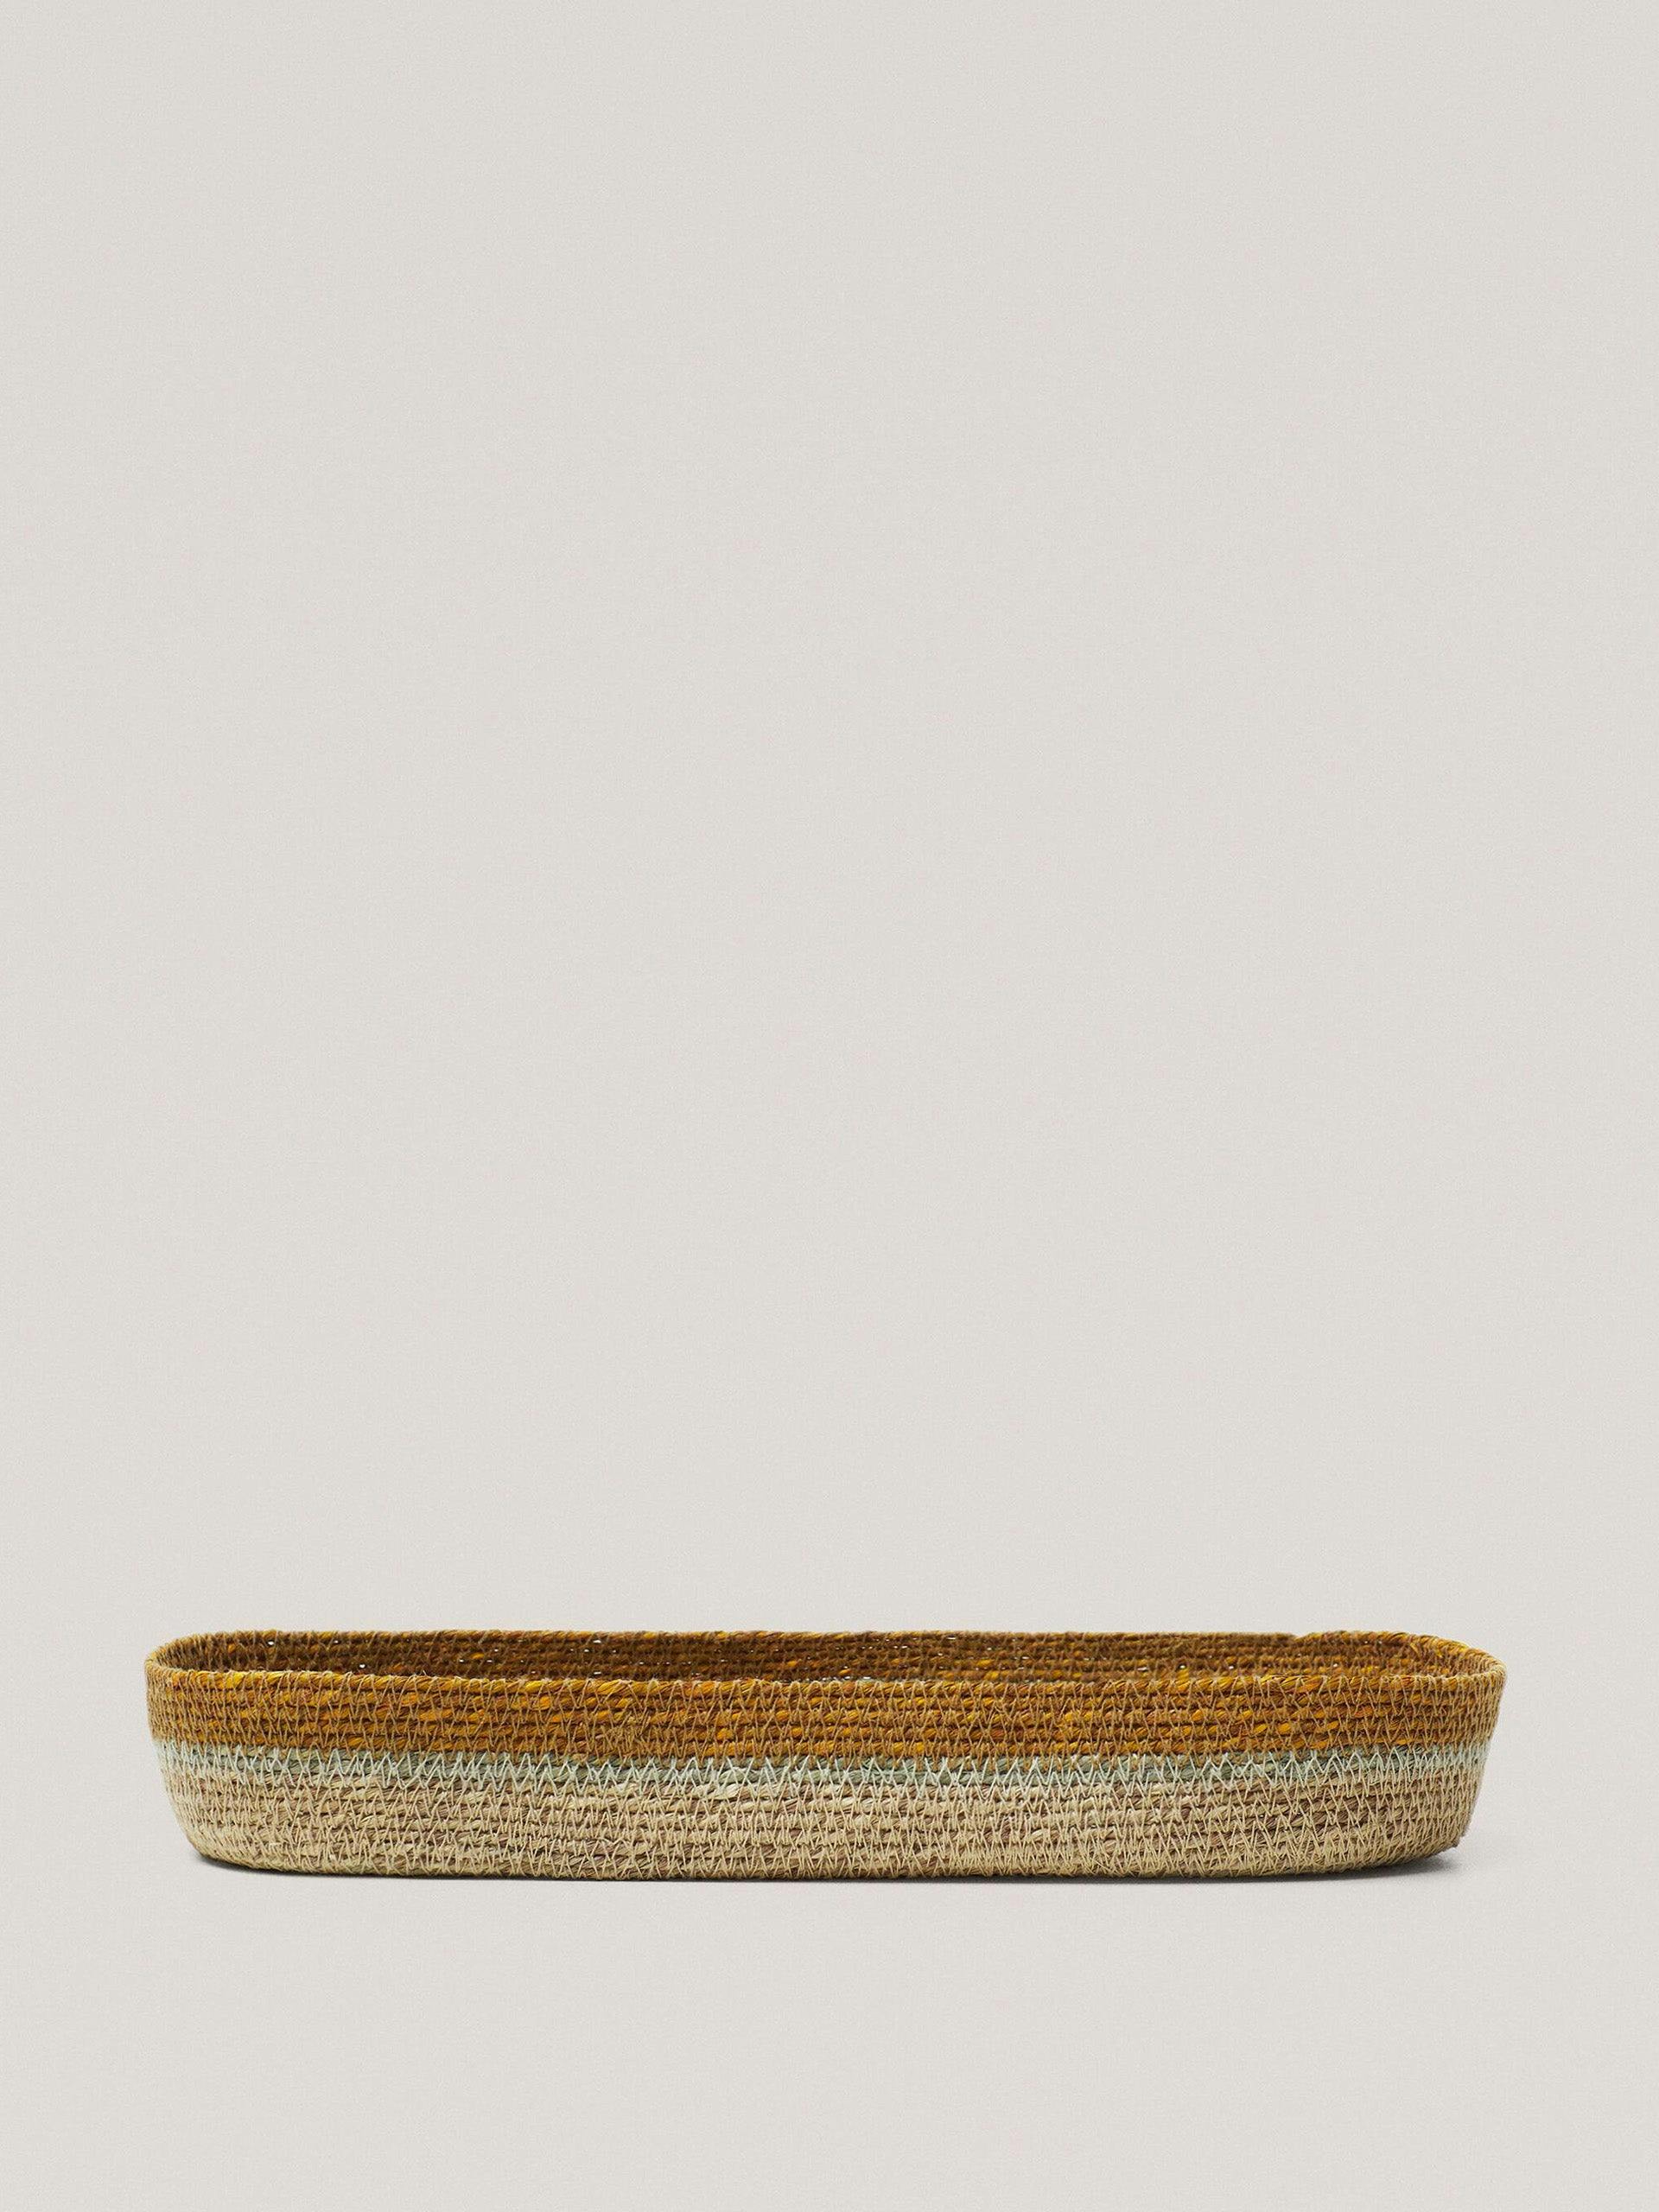 Oval woven tray